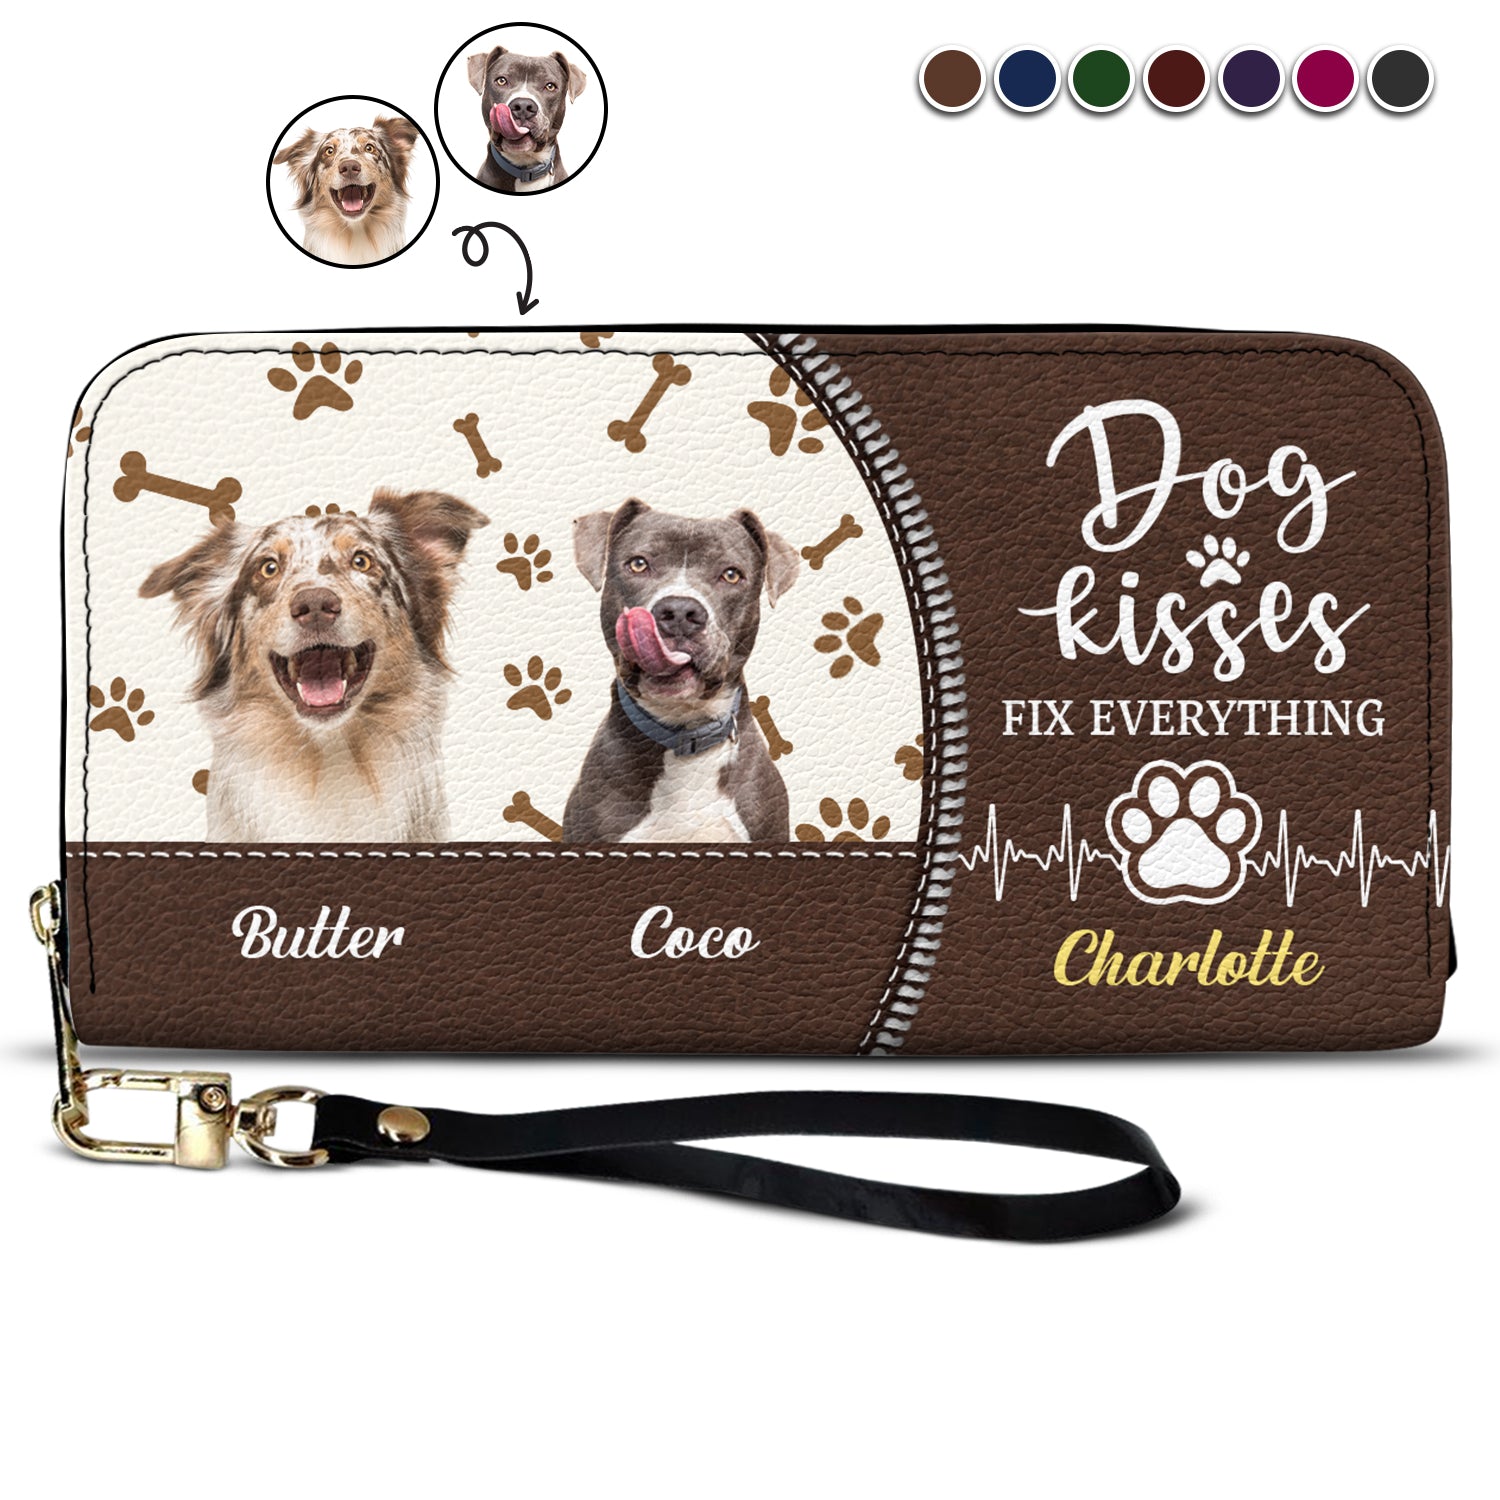 Custom Photo Dog Kisses Fix Everything - Gift For Dog Lovers - Personalized Leather Long Wallet